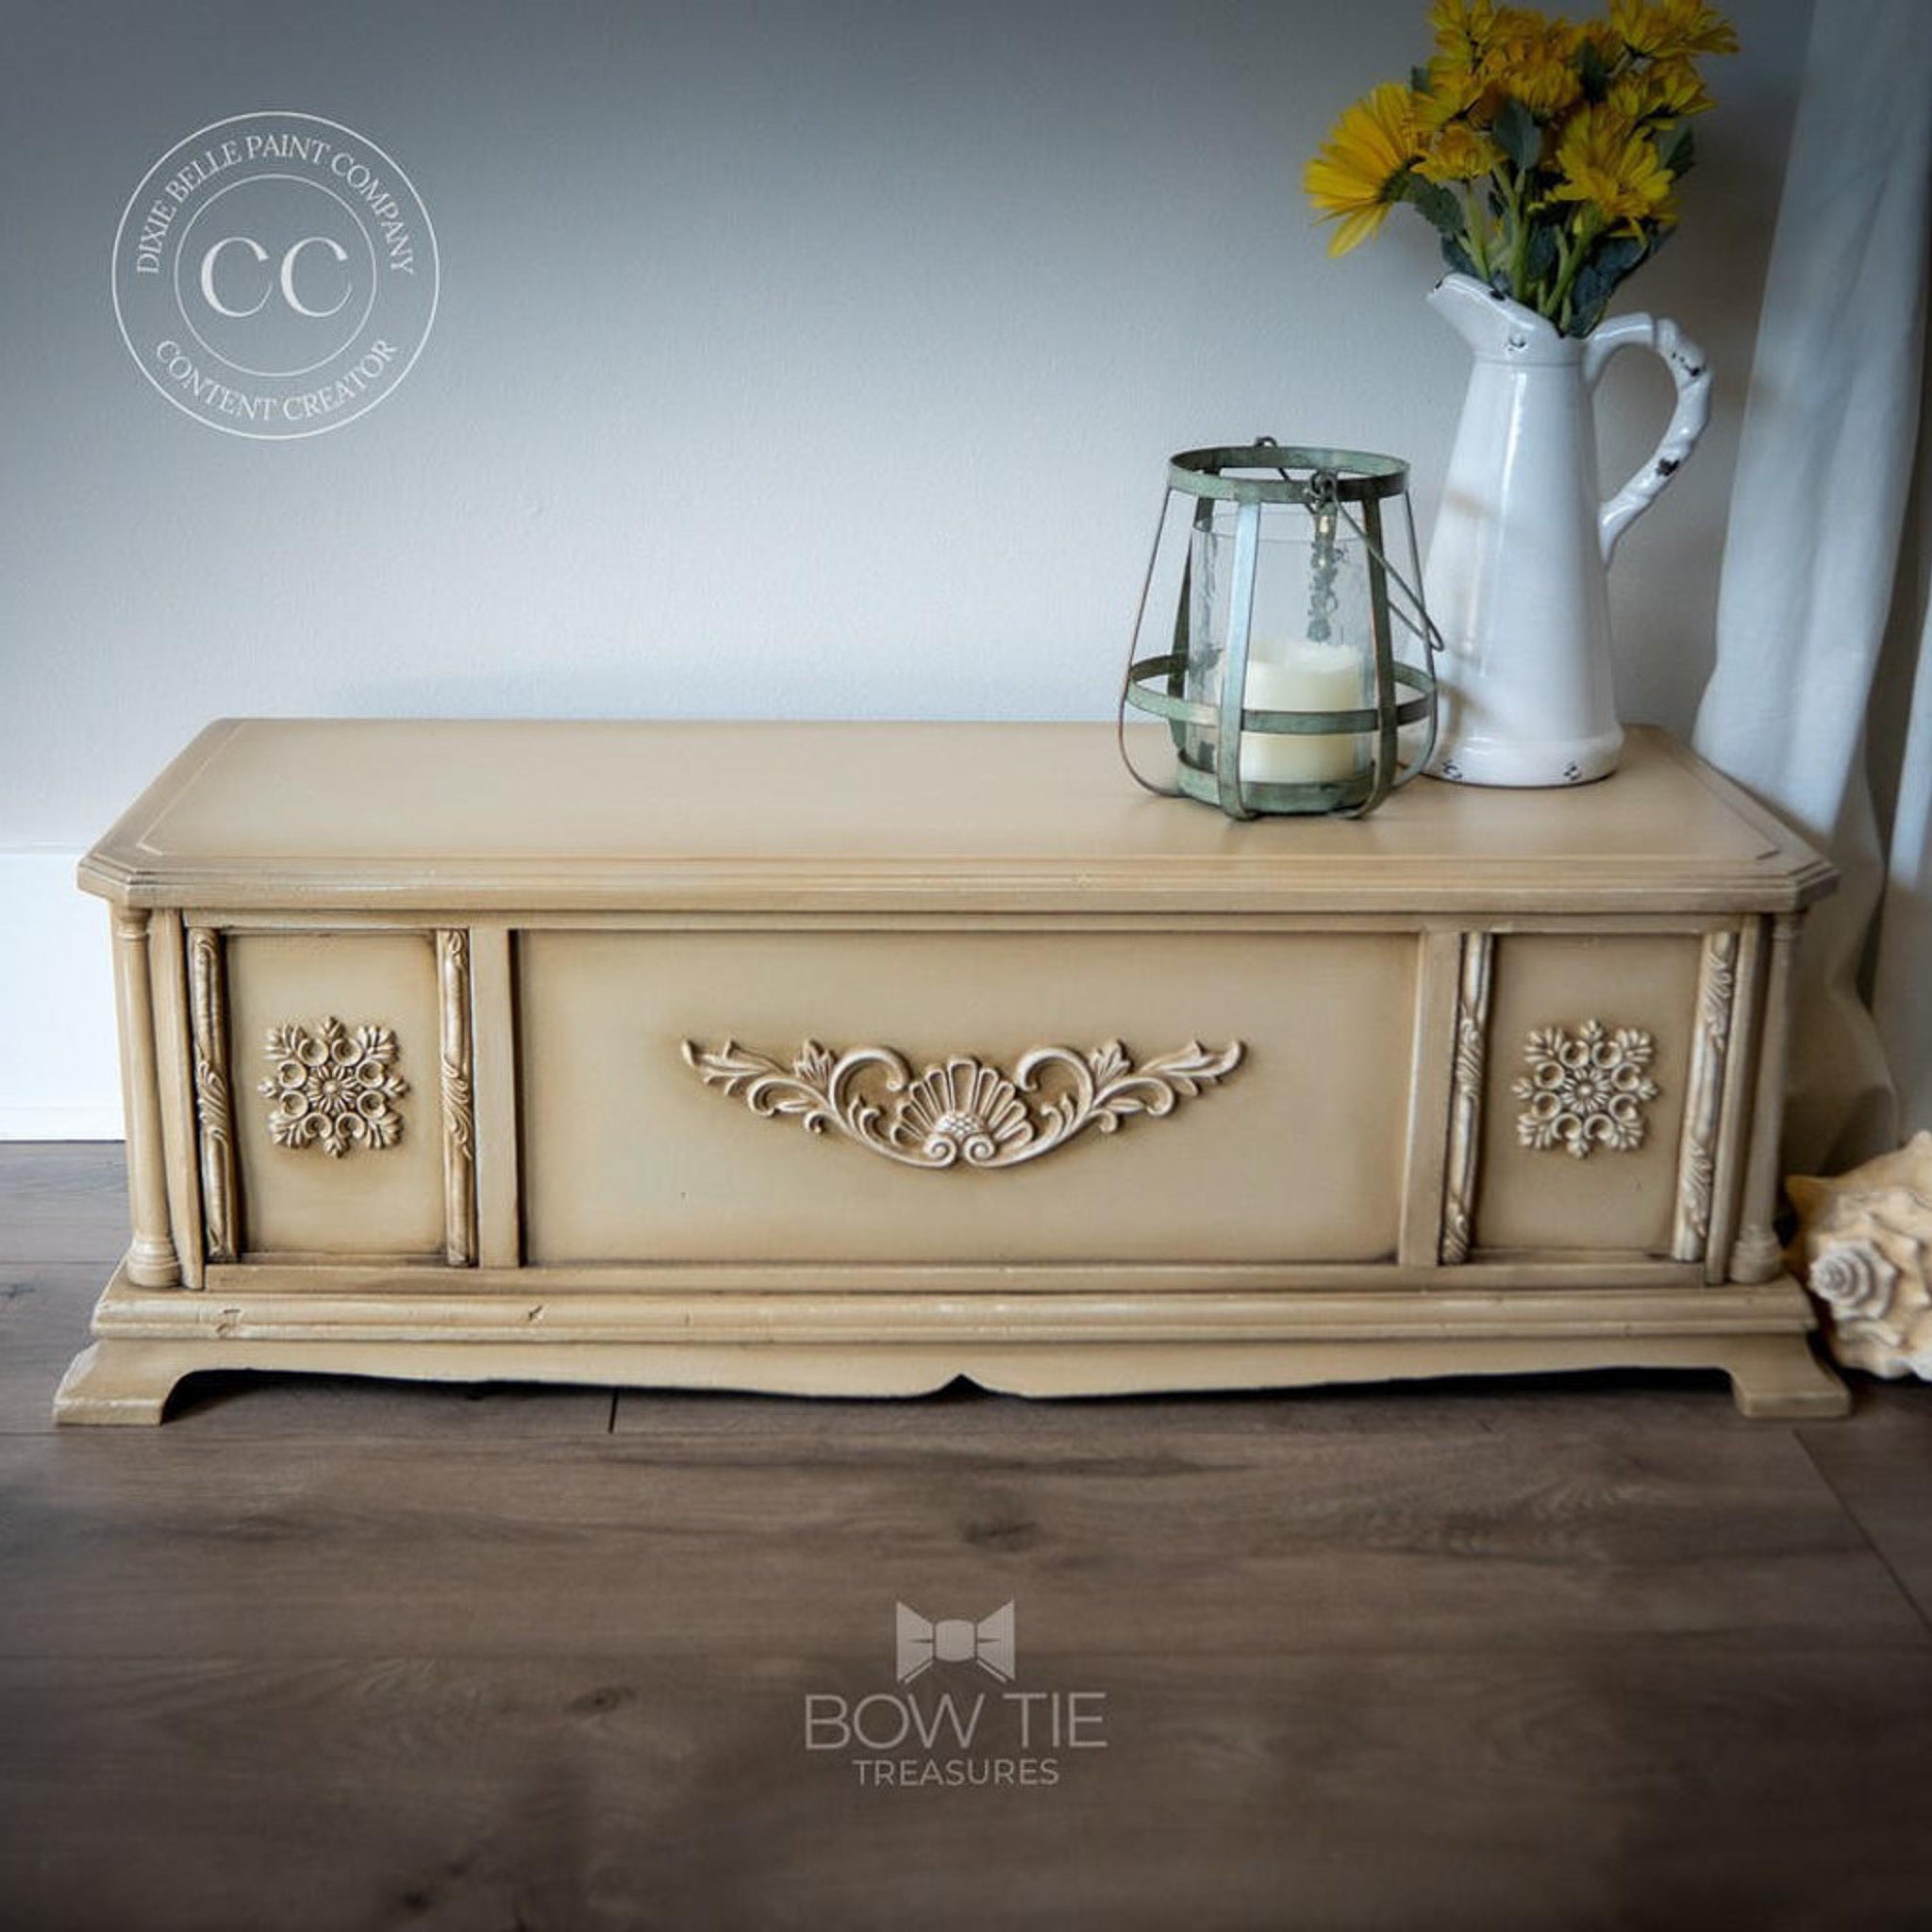 A small vintage table storage box refurbished by Bow Tie Treasures is painted light sandy brown and features Dixie Belle Paint's Van Dyke Brown Glaze on it to accent detailed areas.